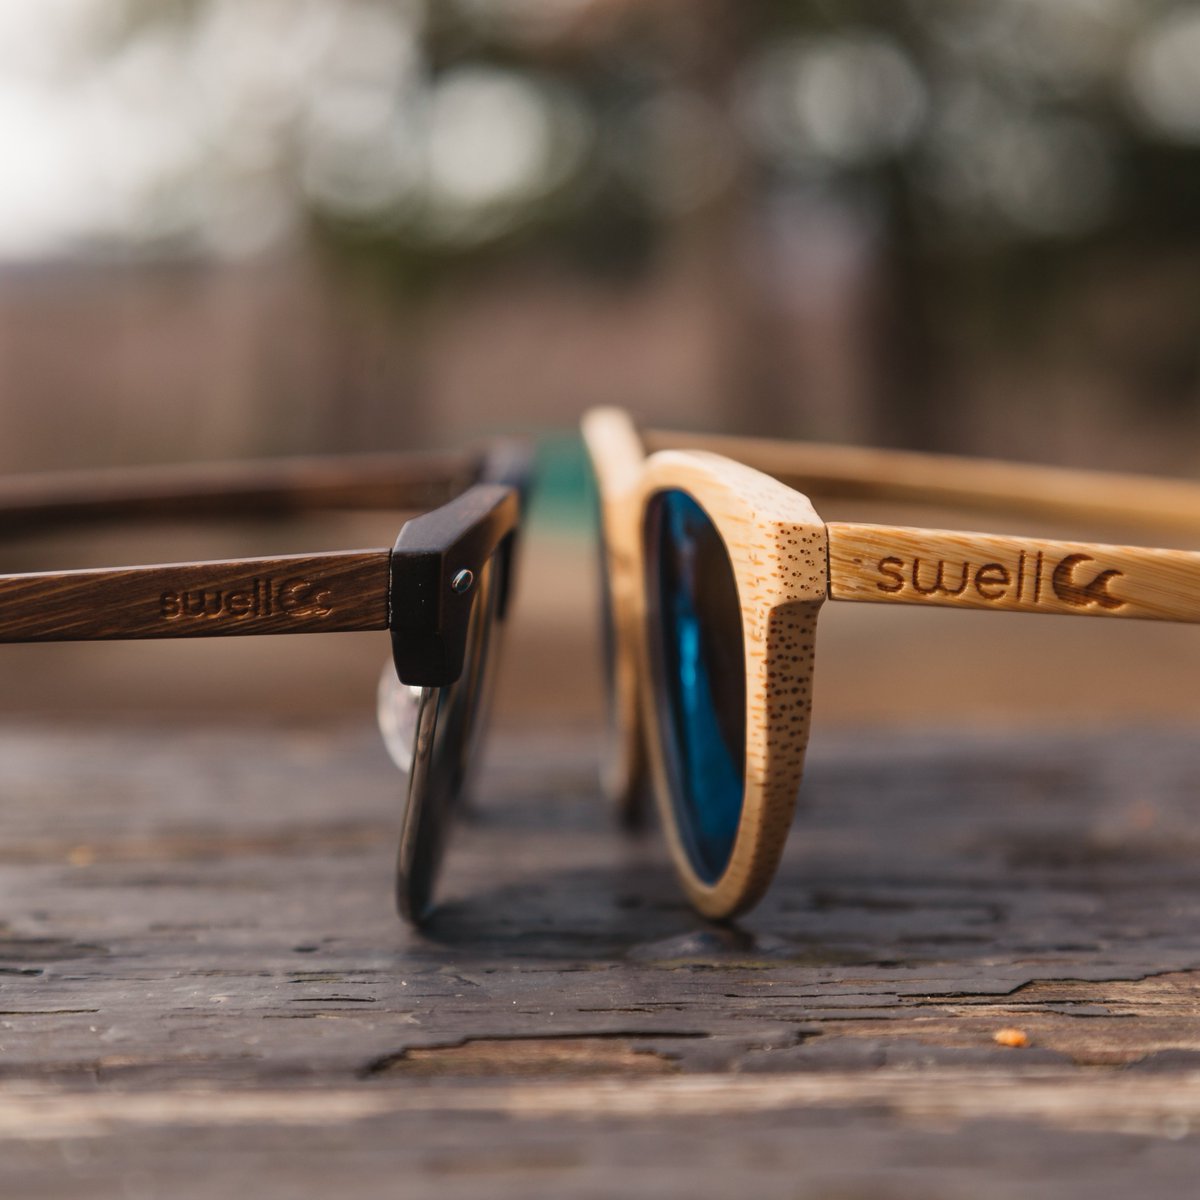 Shades so good they're less of a gift for him and more of a gift for you to steal.

#bamboo #valentinesday #sustainable #polorized #takeuswithyou #Sunglasses